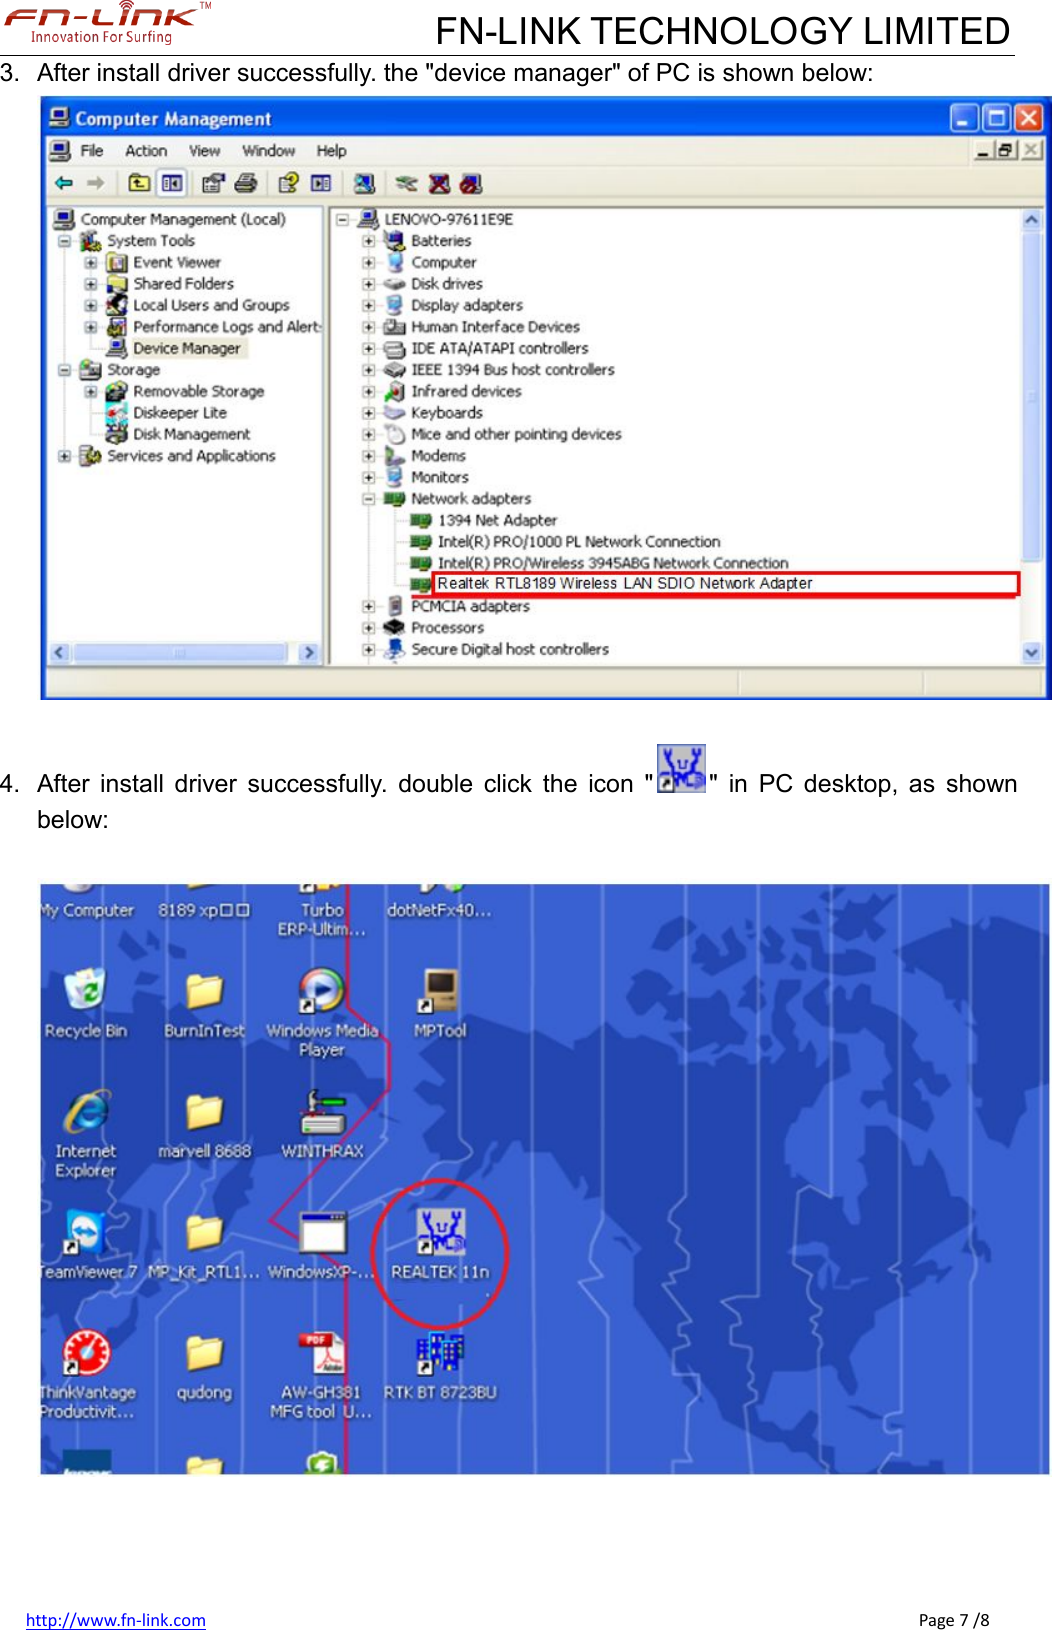 FN-LINK TECHNOLOGY LIMITEDhttp://www.fn-link.com Page 7 /83. After install driver successfully. the &quot;device manager&quot; of PC is shown below:4. After install driver successfully. double click the icon &quot; &quot; in PC desktop, as shownbelow: